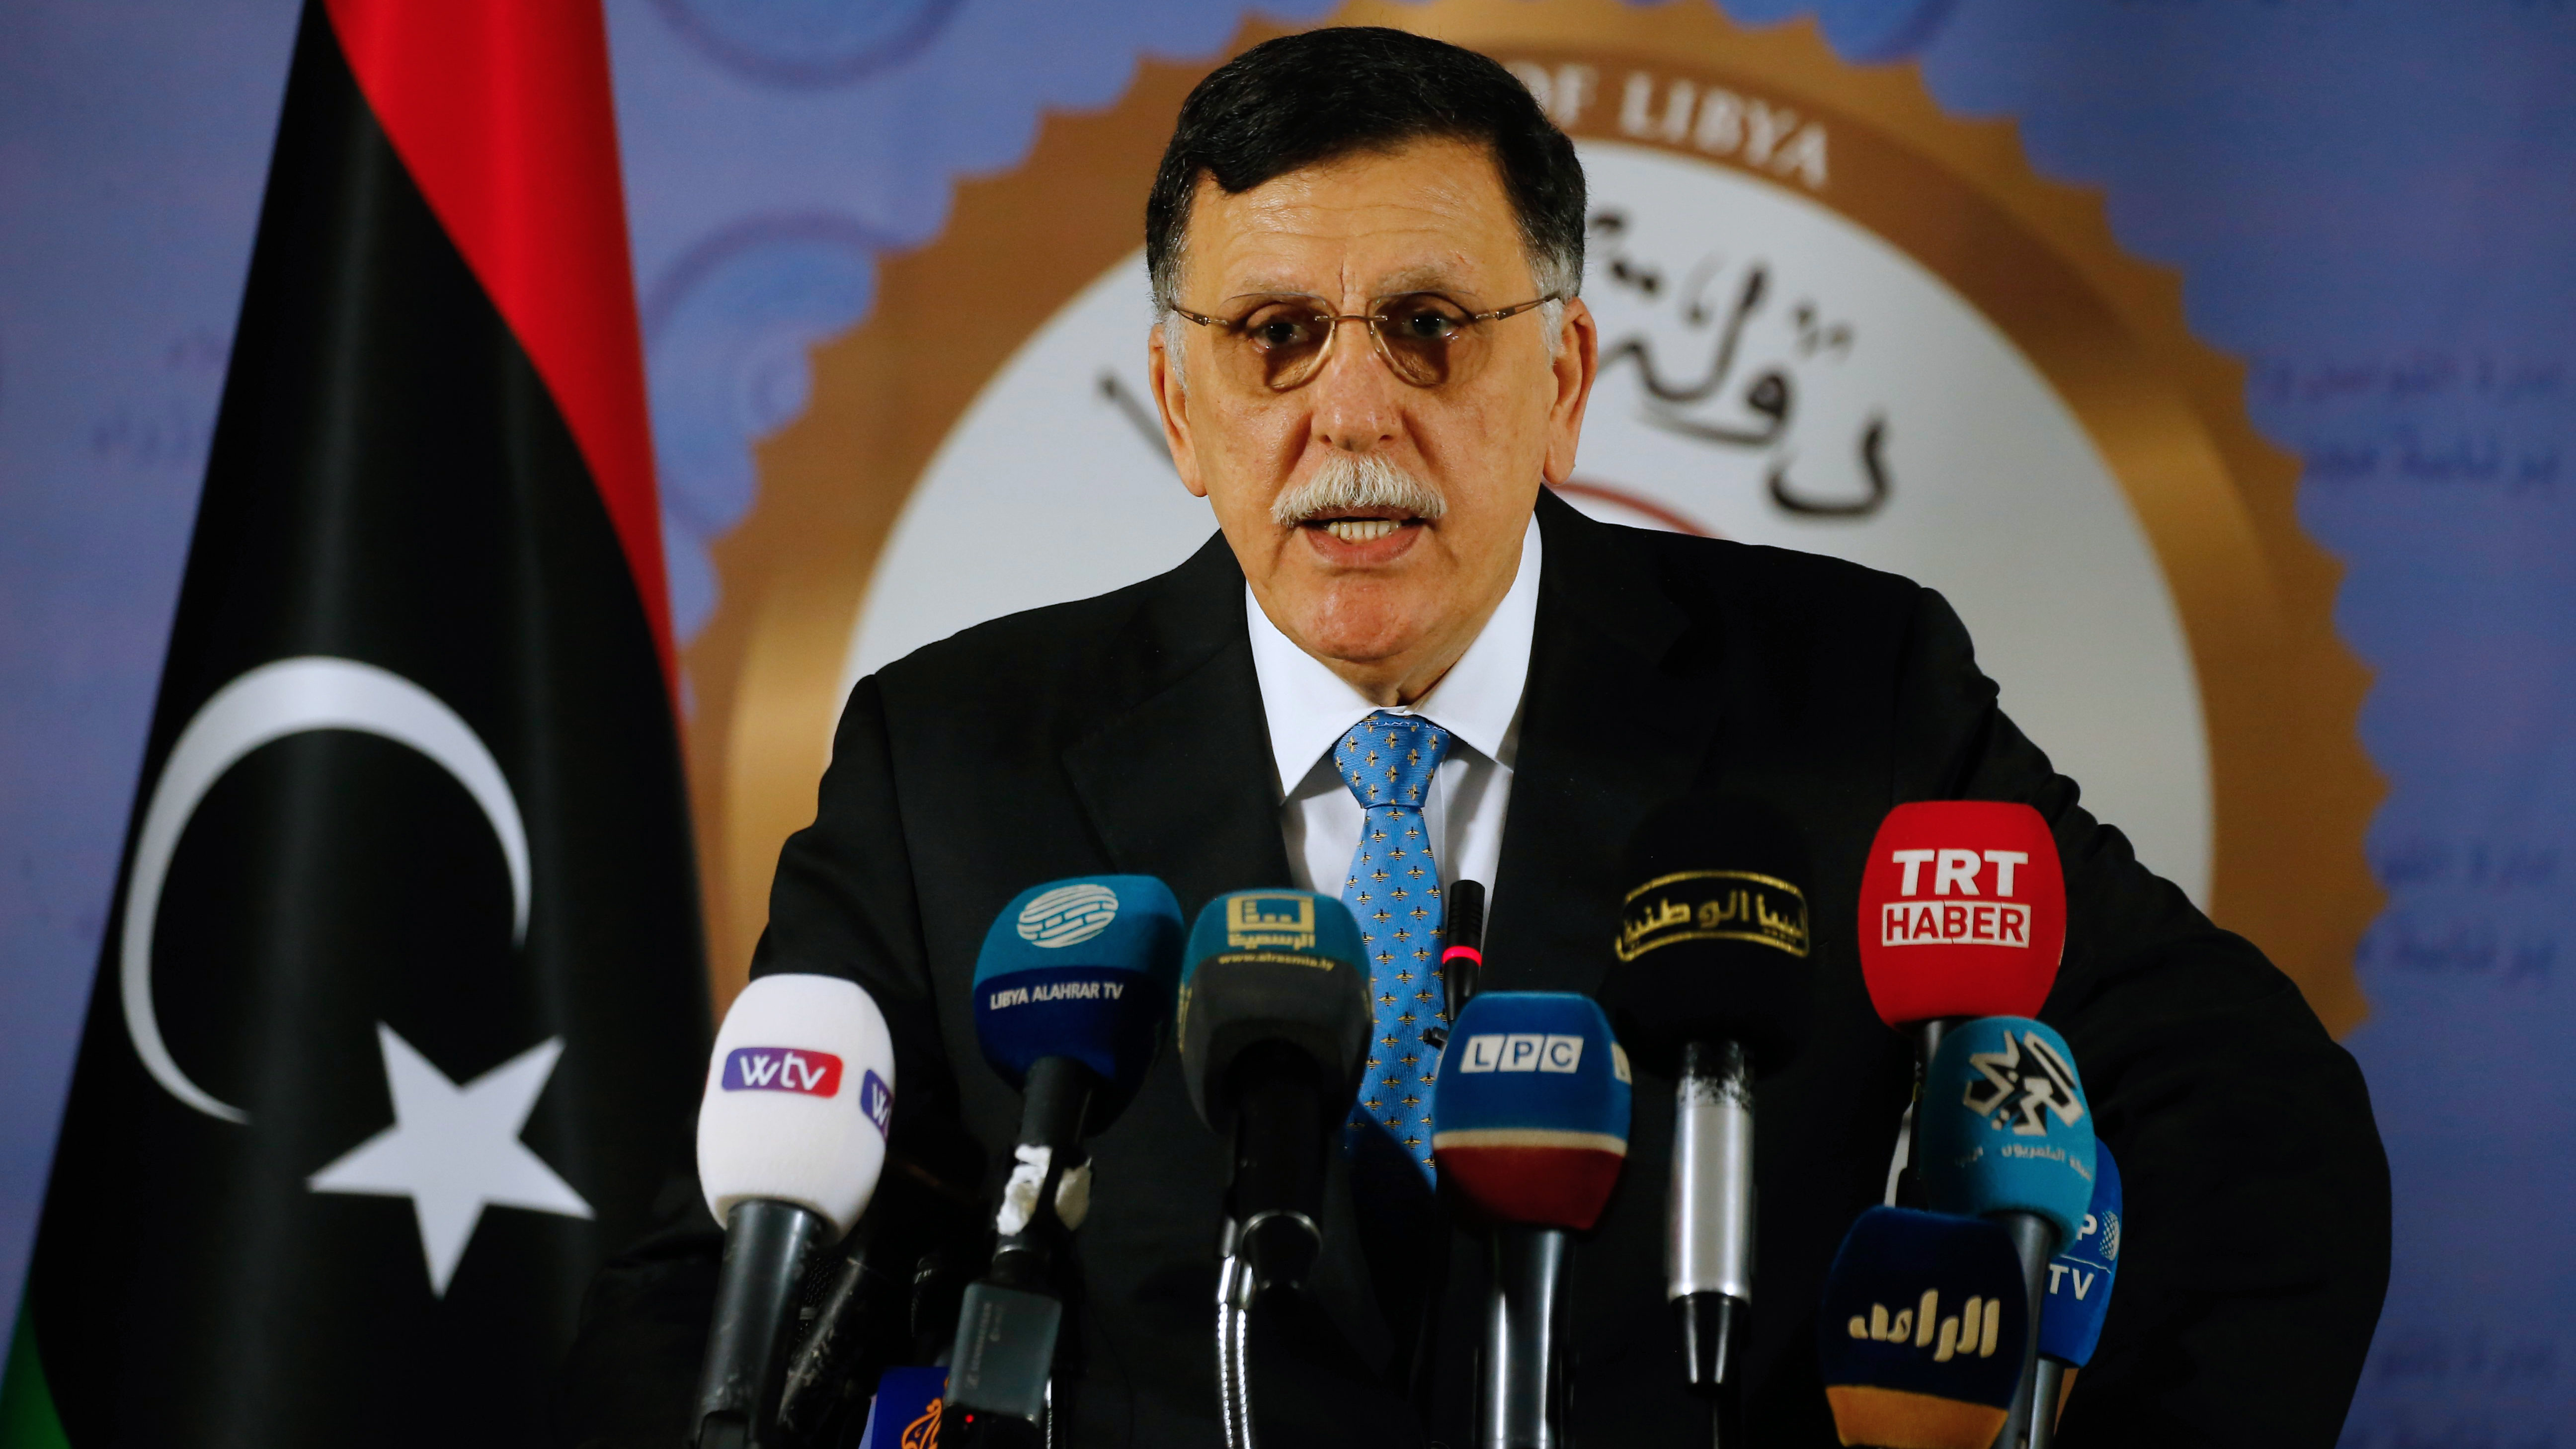 To Cease Hostilities, Libyan PM Calls for Elections by End of Year